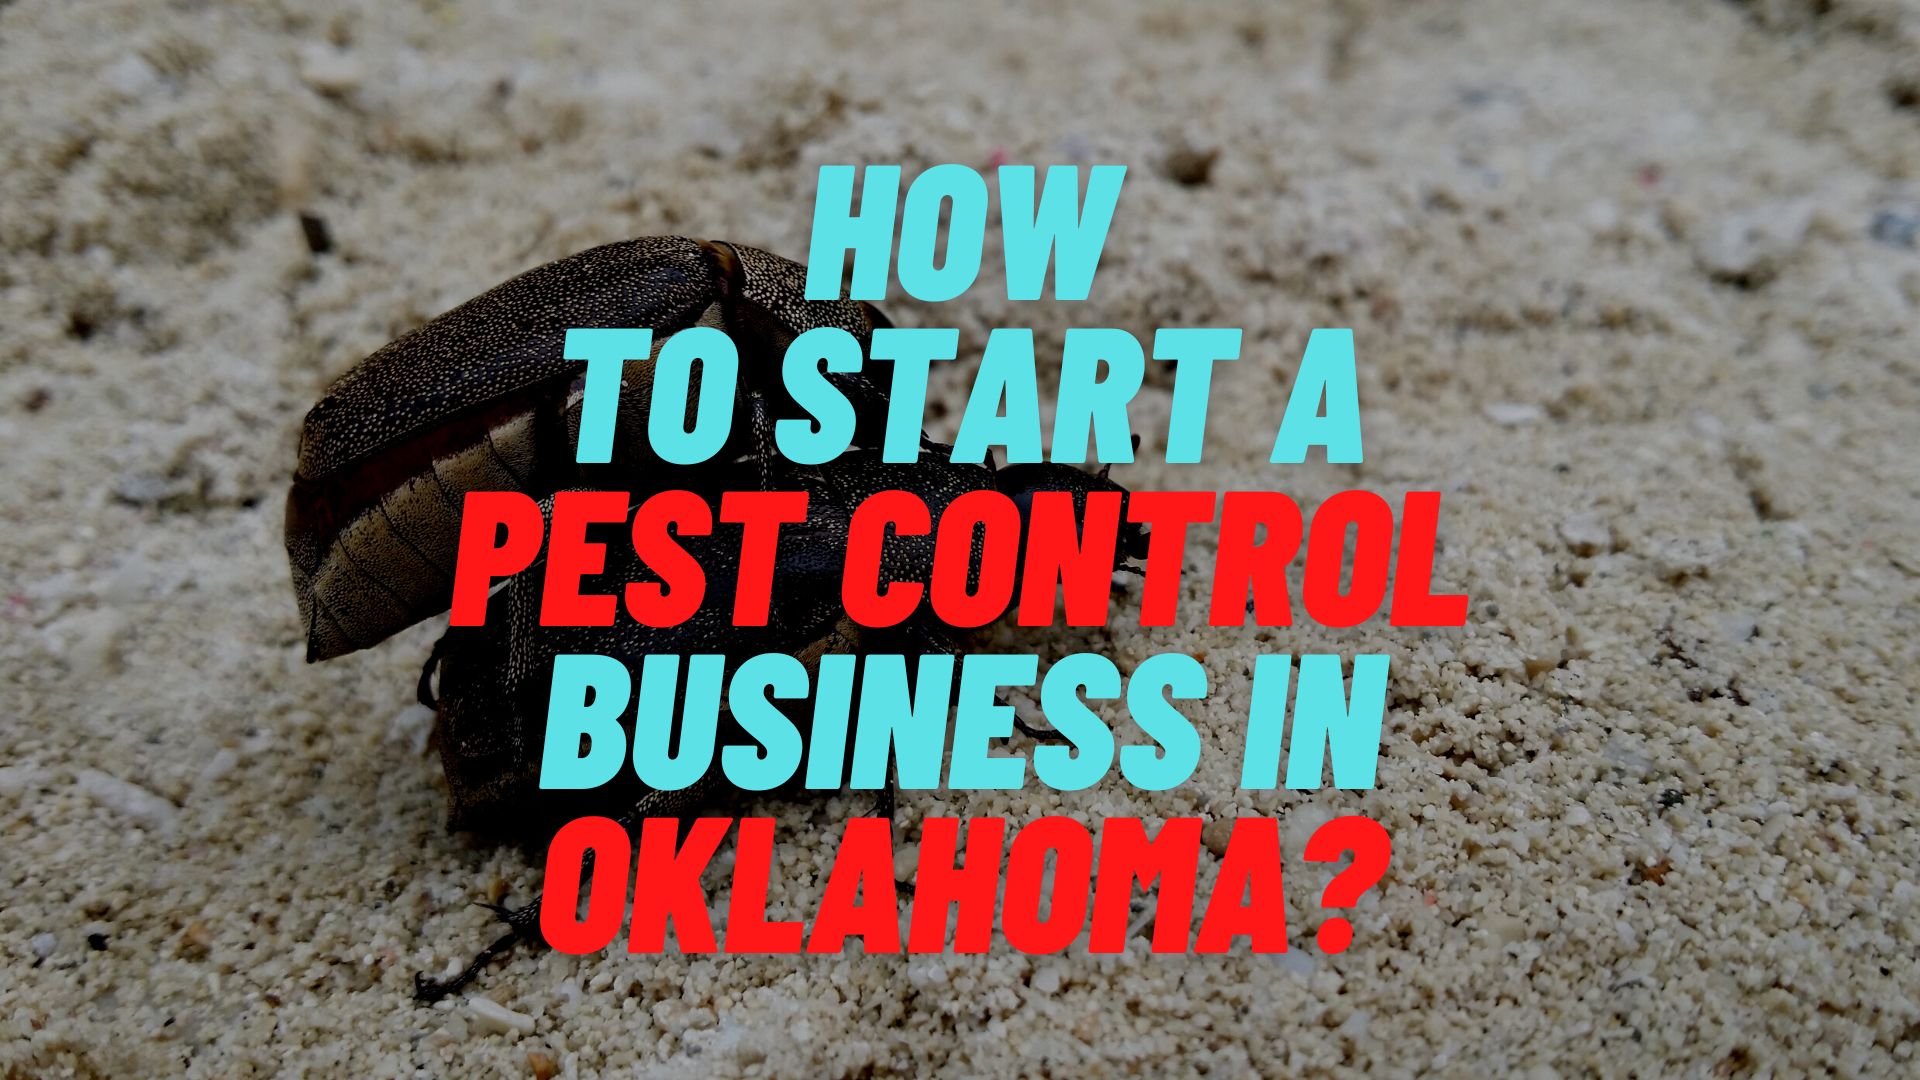 How to start a pest control business in Oklahoma?